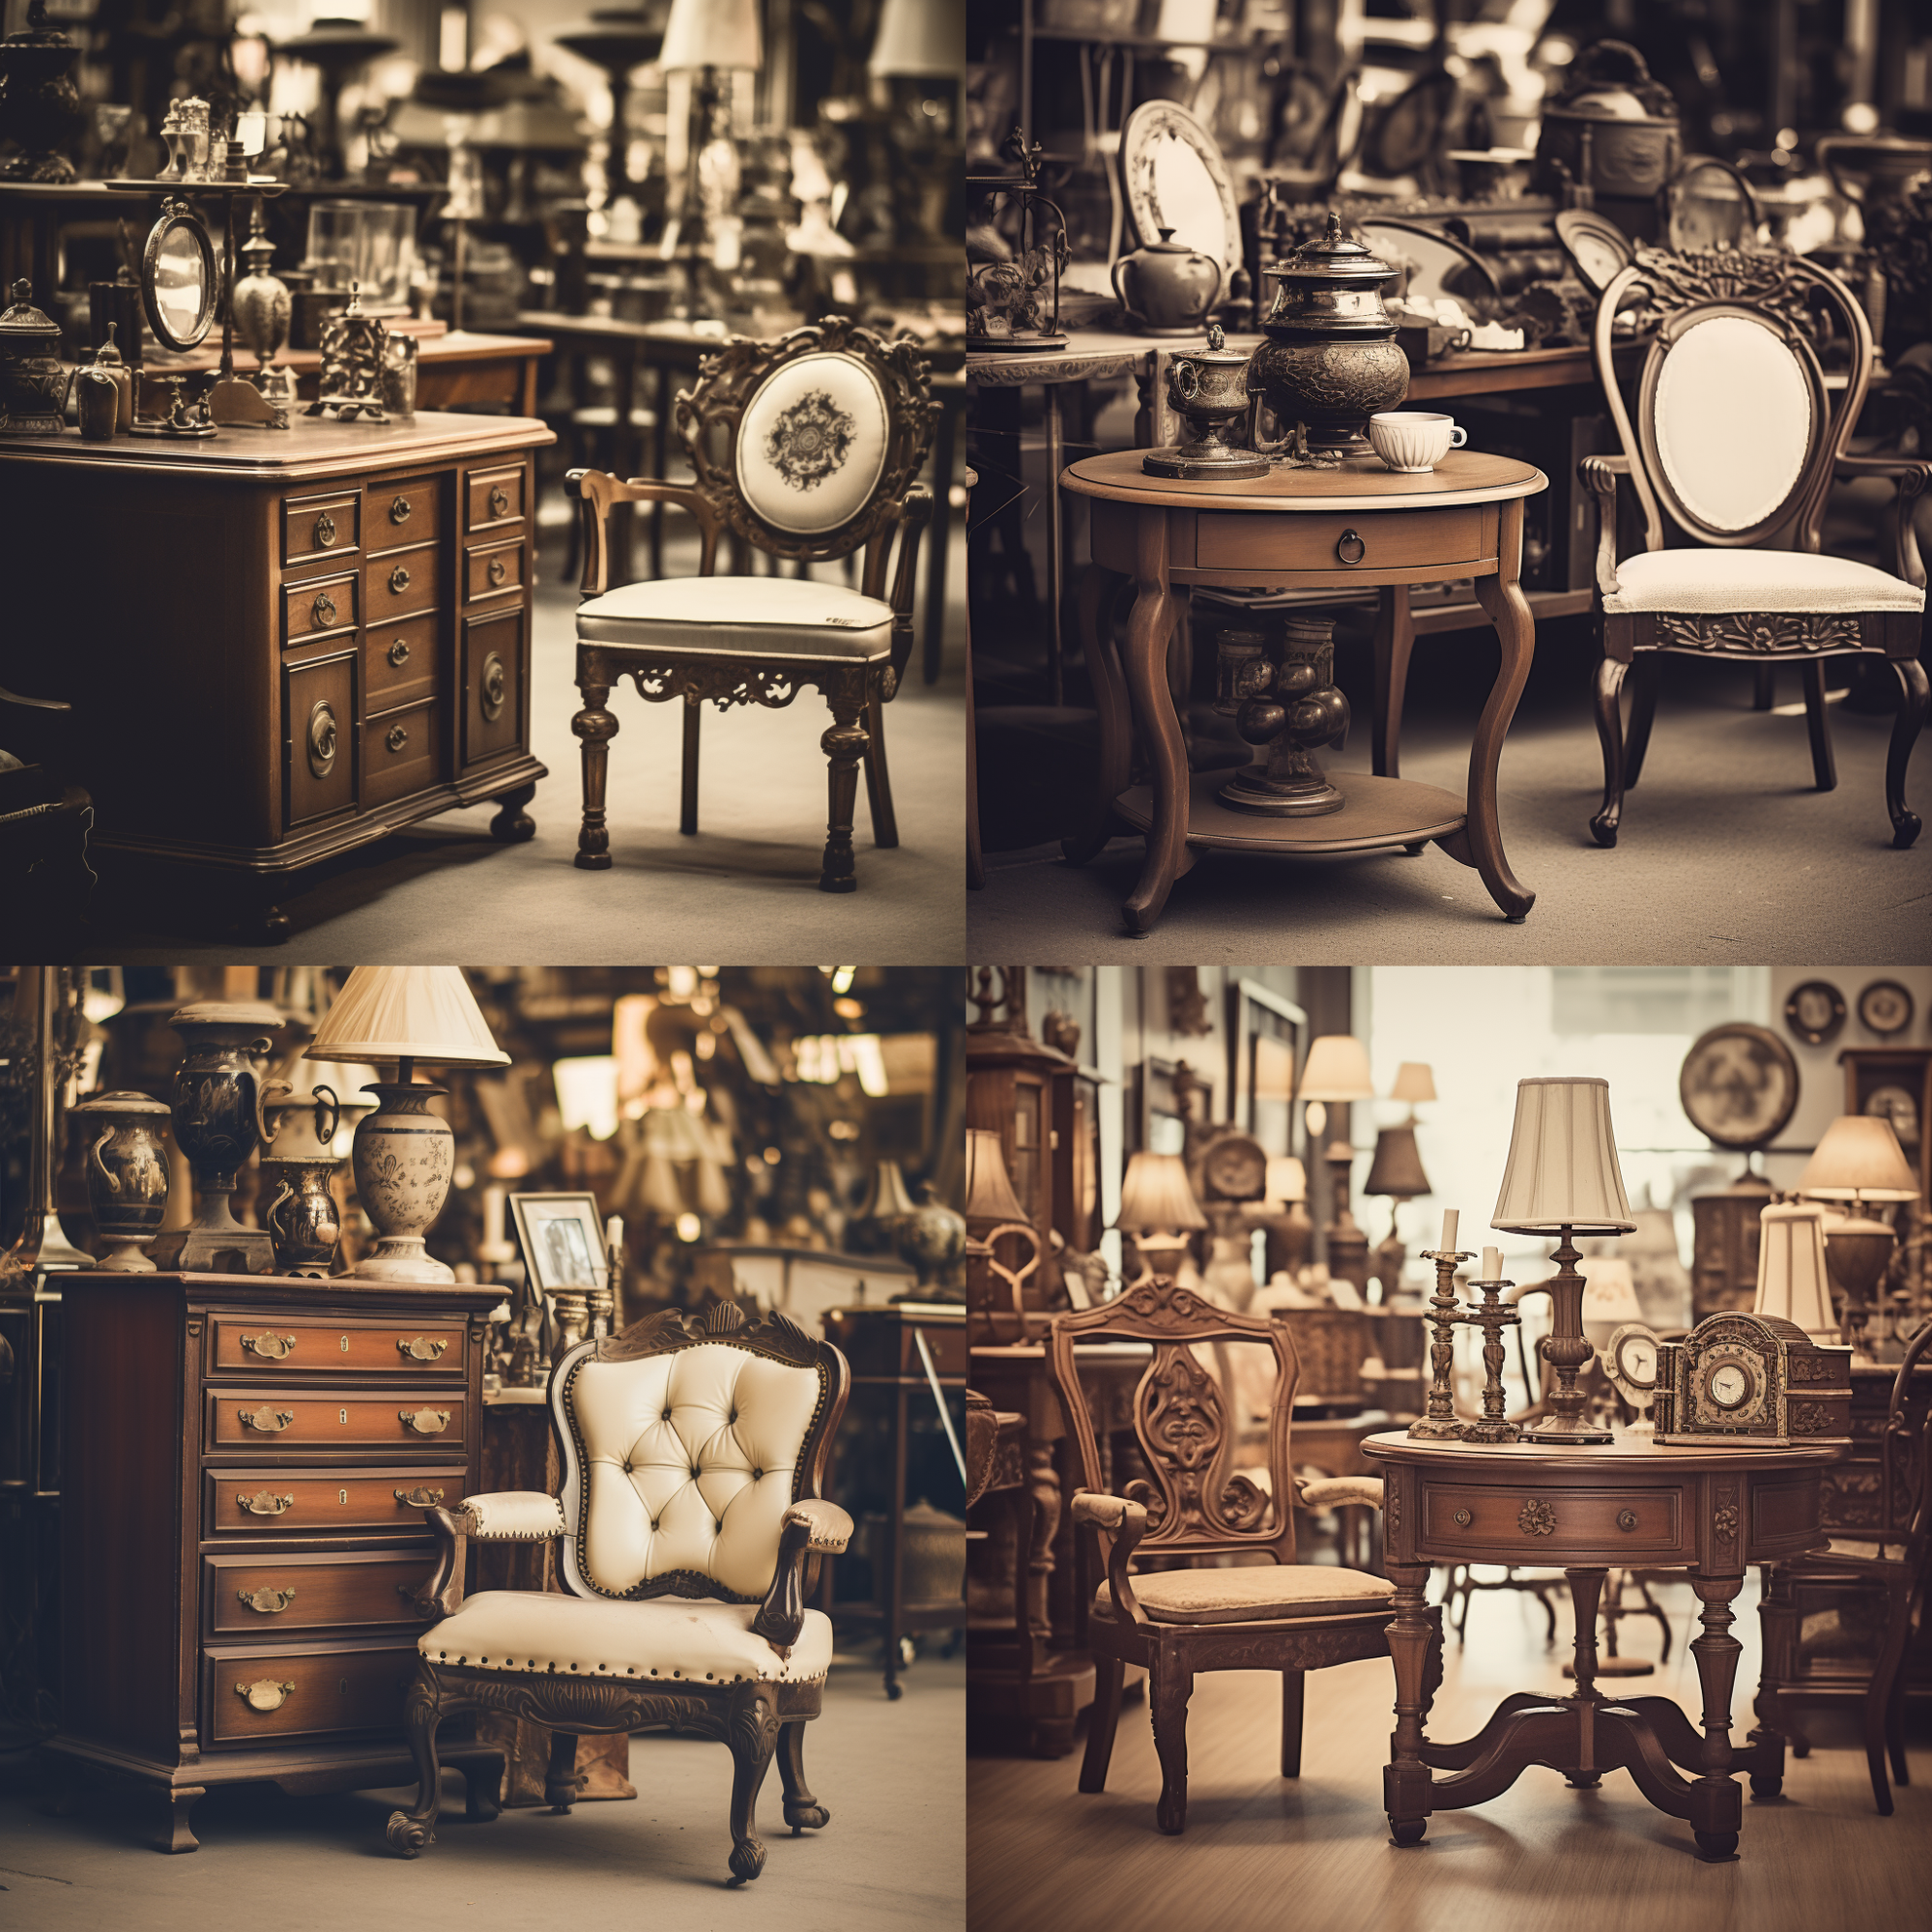 Four image options generated by Midjourney based on a vintage vibes marketplace prompt